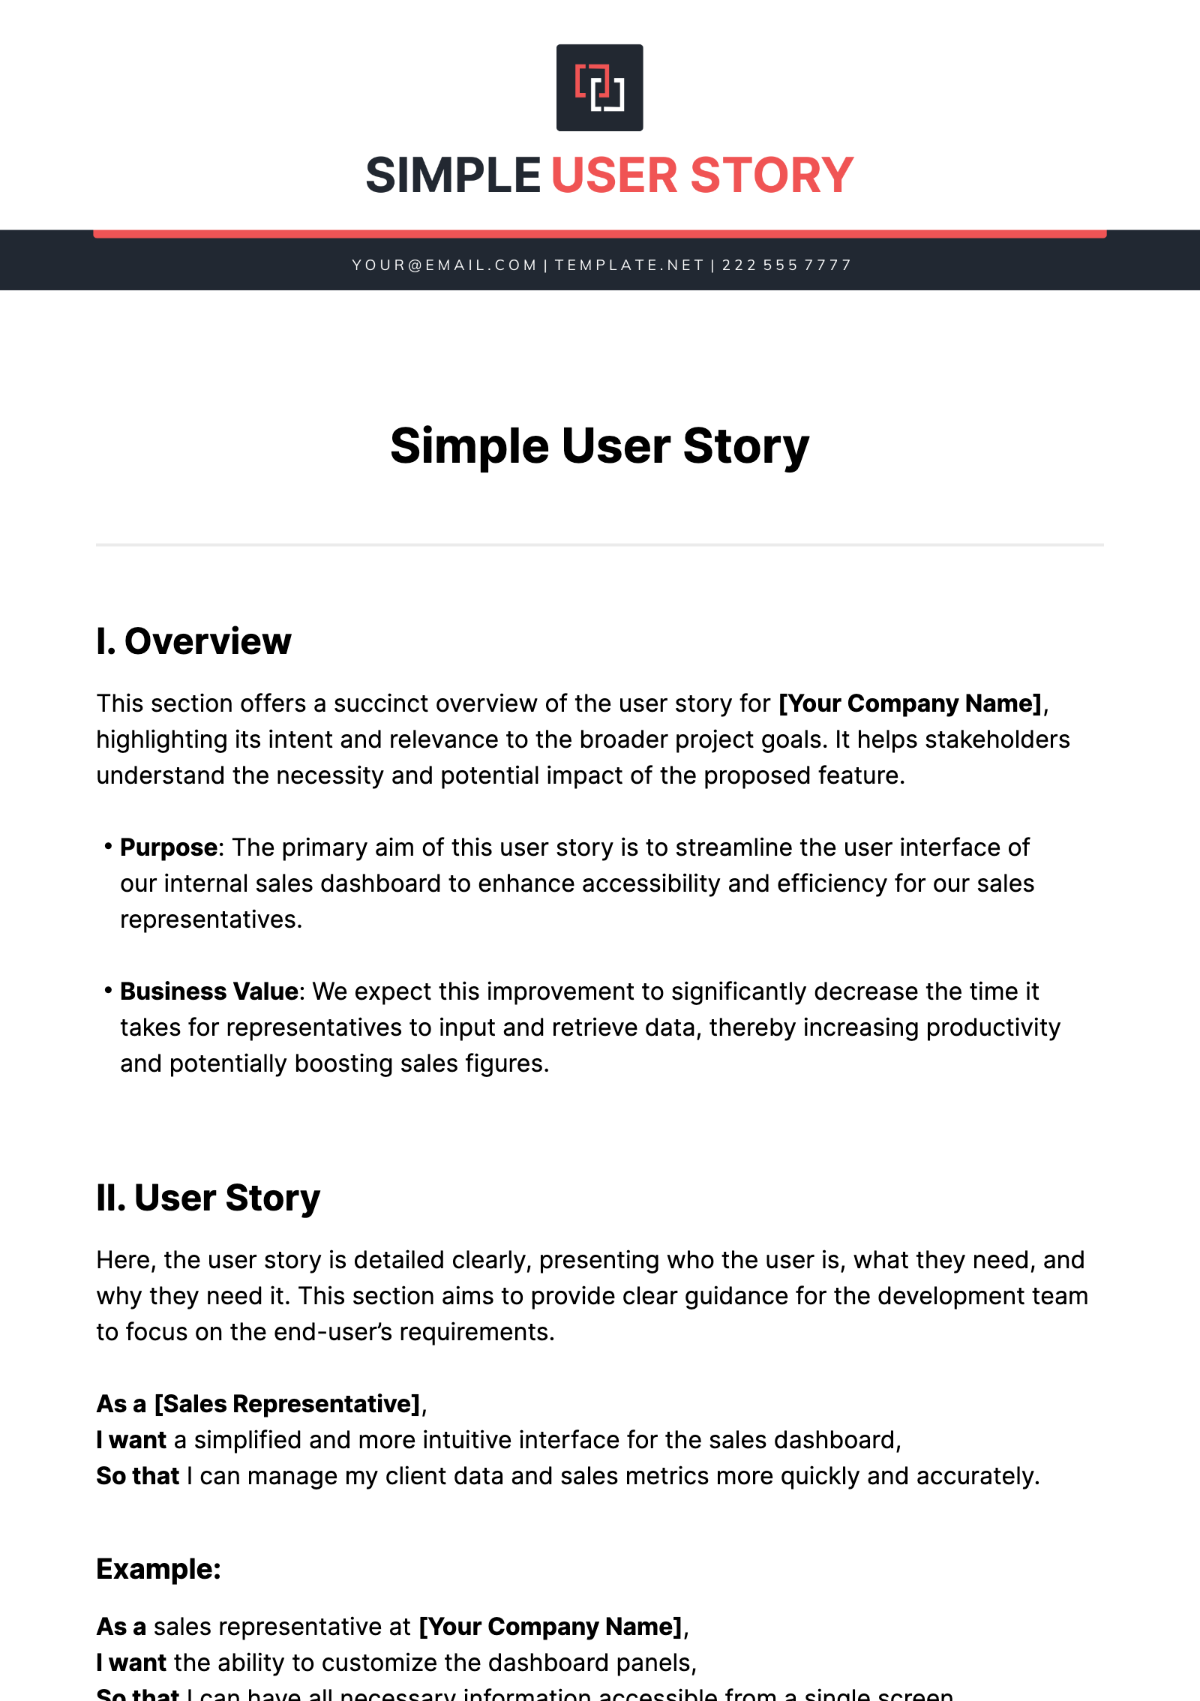 Simple User Story Template